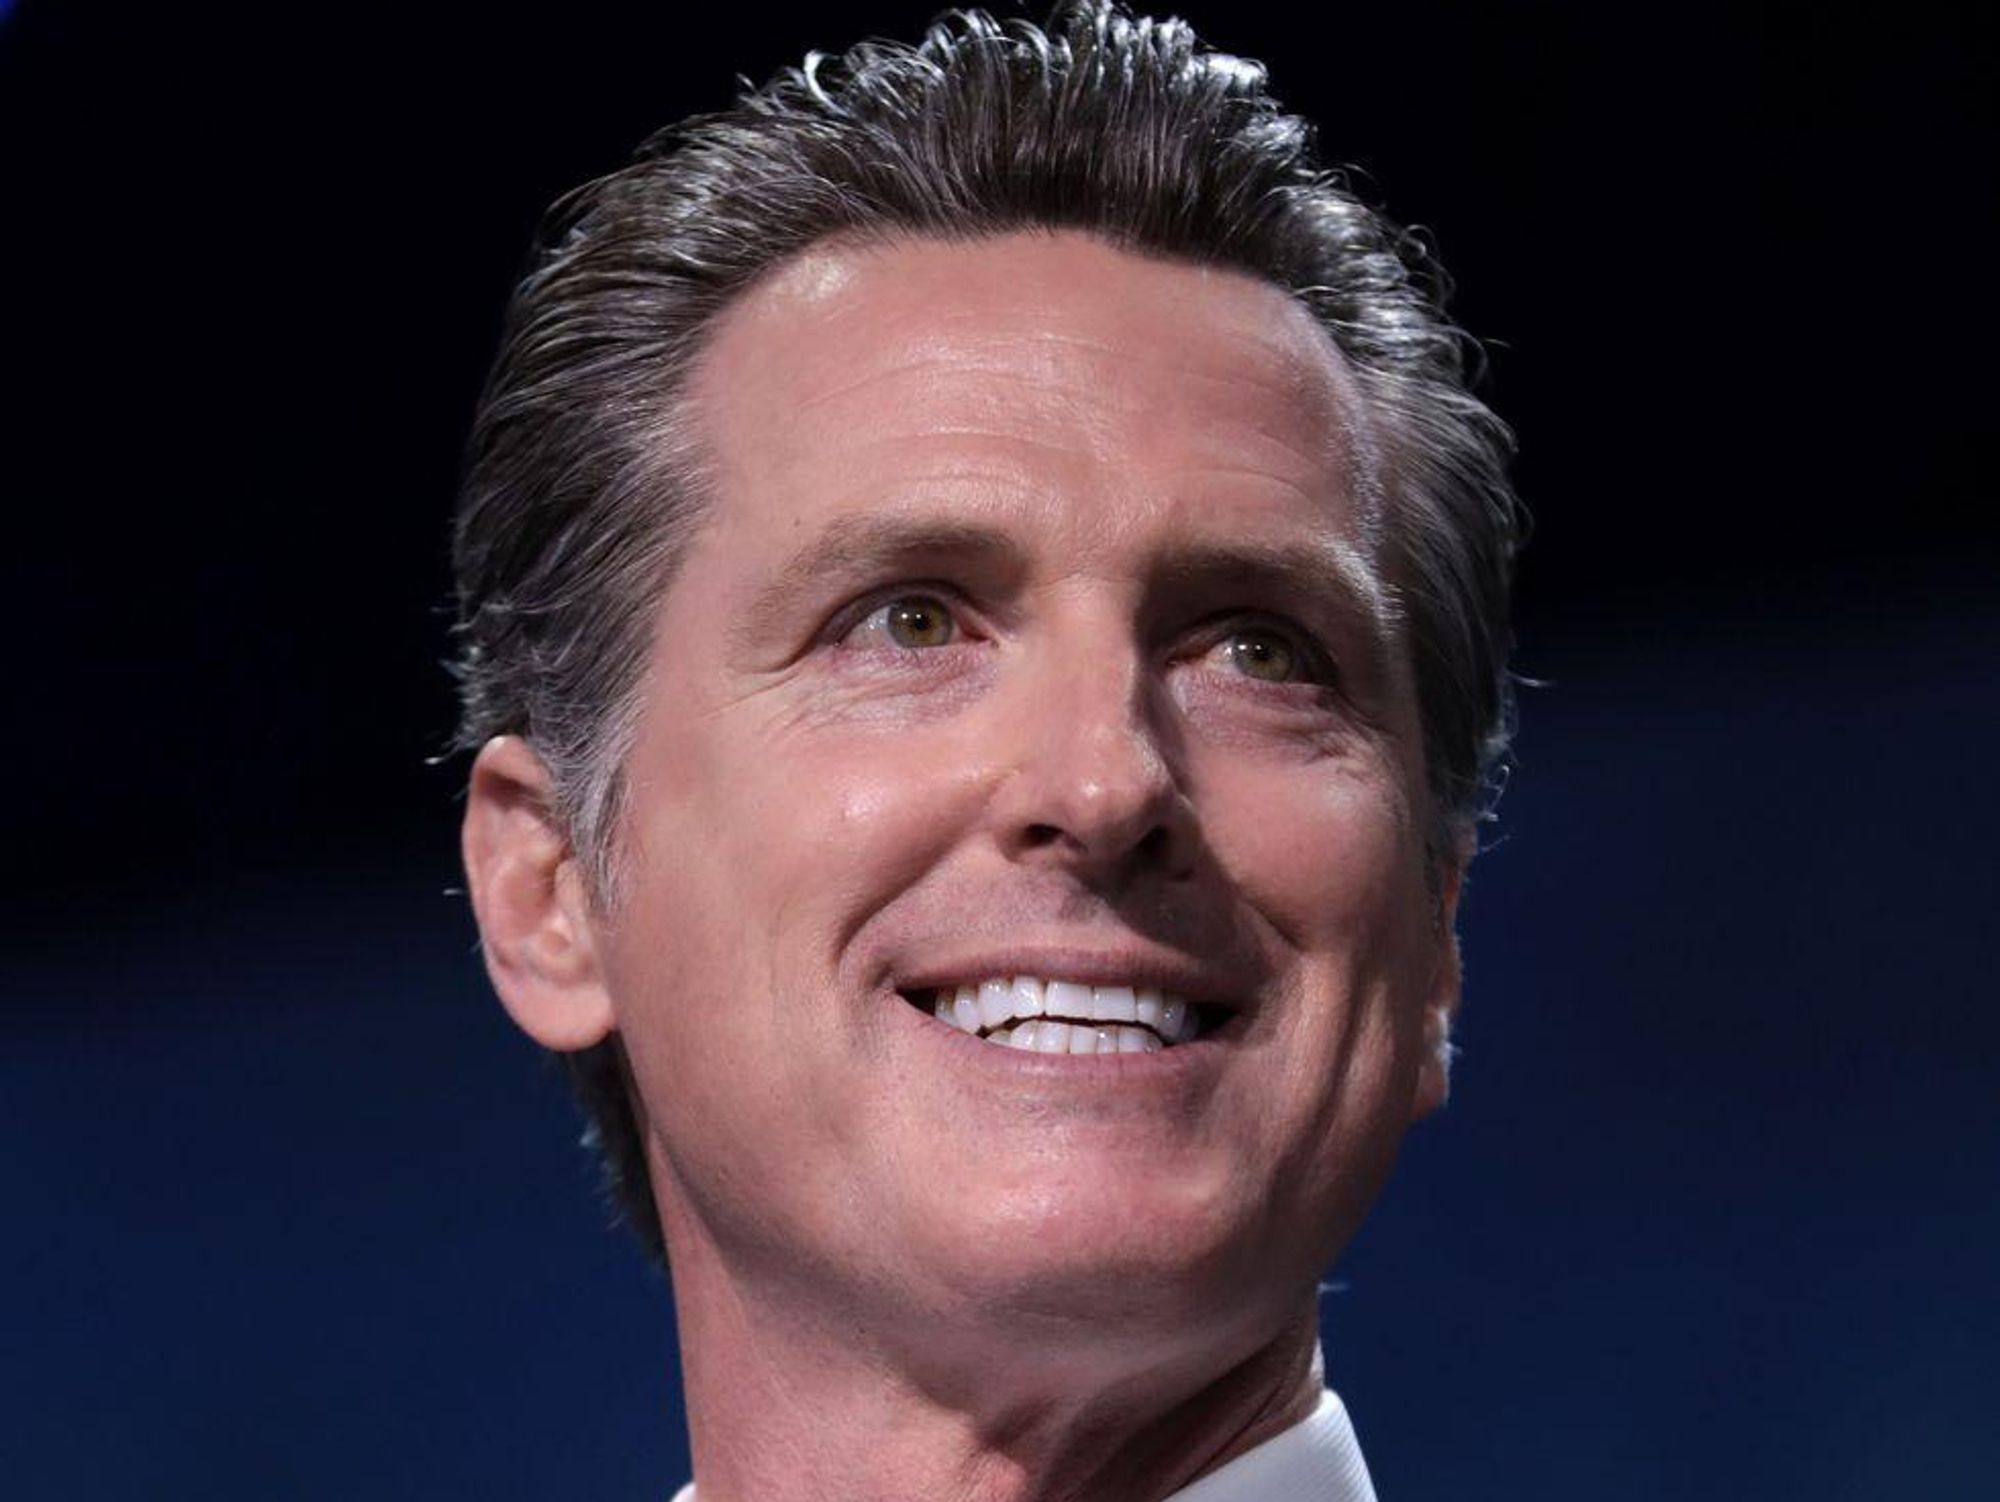 Newsom Beat the Recall. That Means Big Tech Still Has a Friend in Power